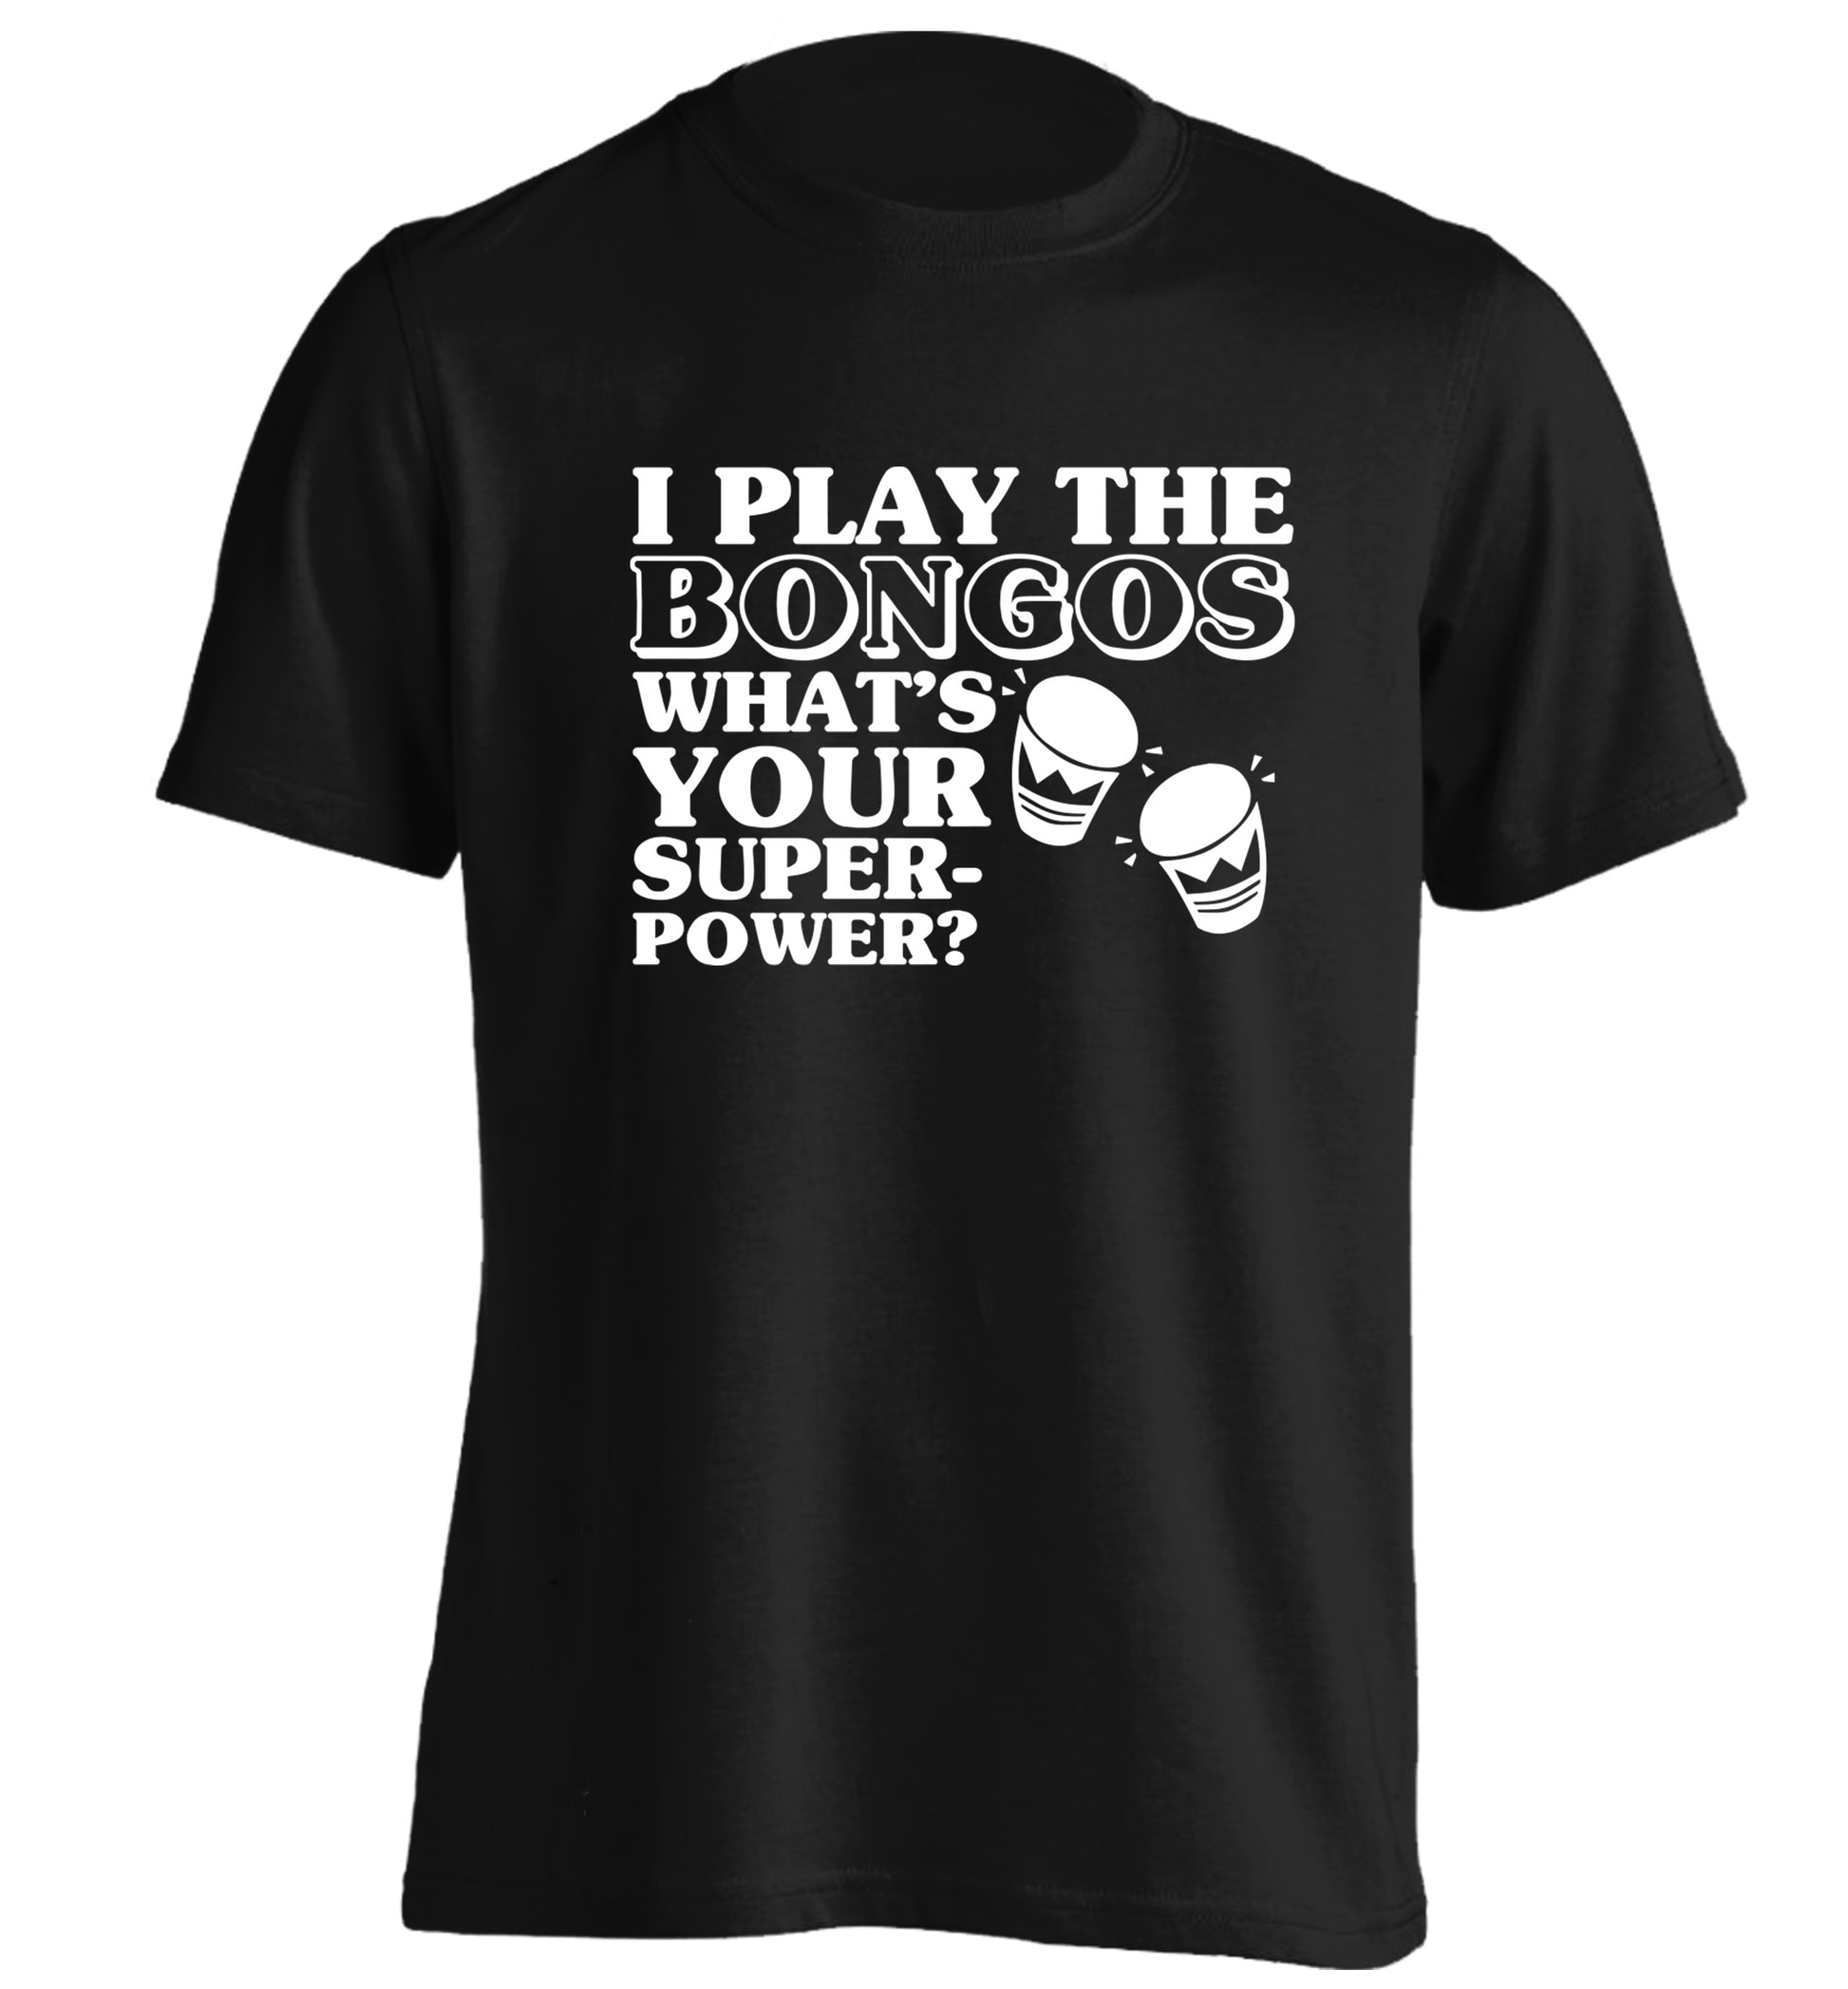 I play the bongos what's your superpower? adults unisexblack Tshirt 2XL